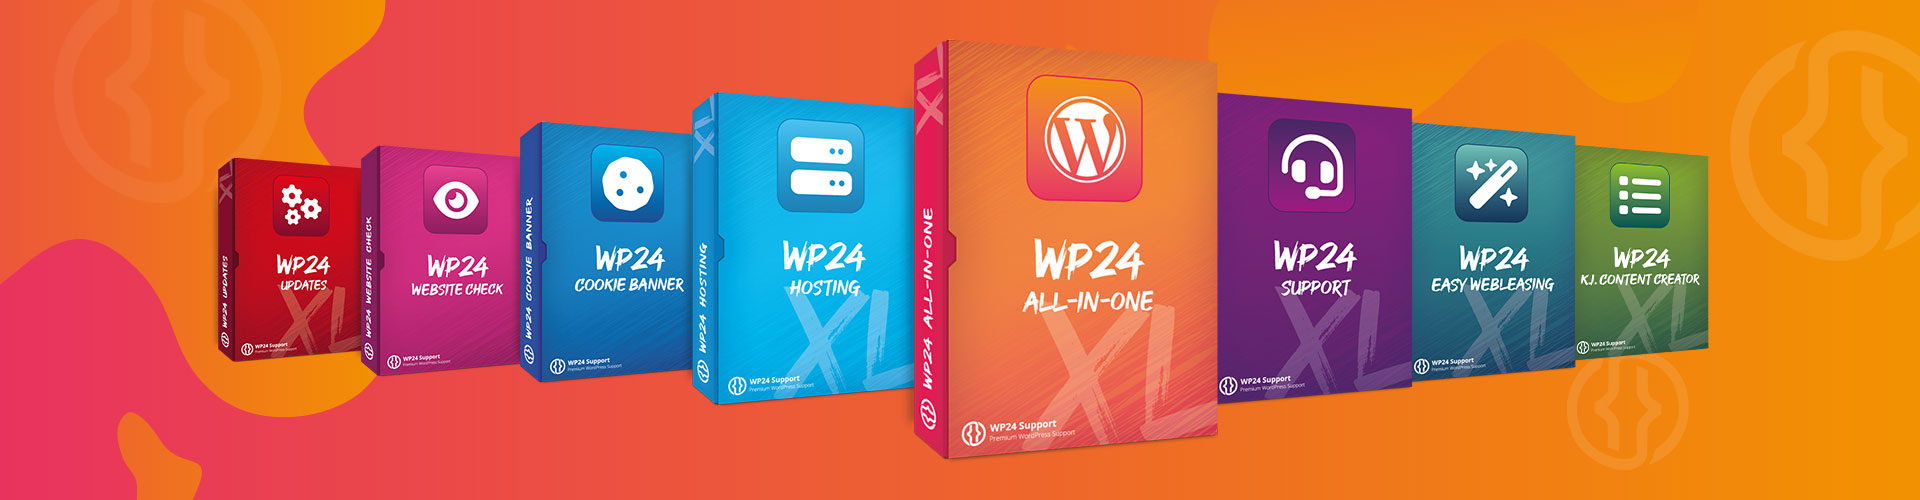 WP24 Support